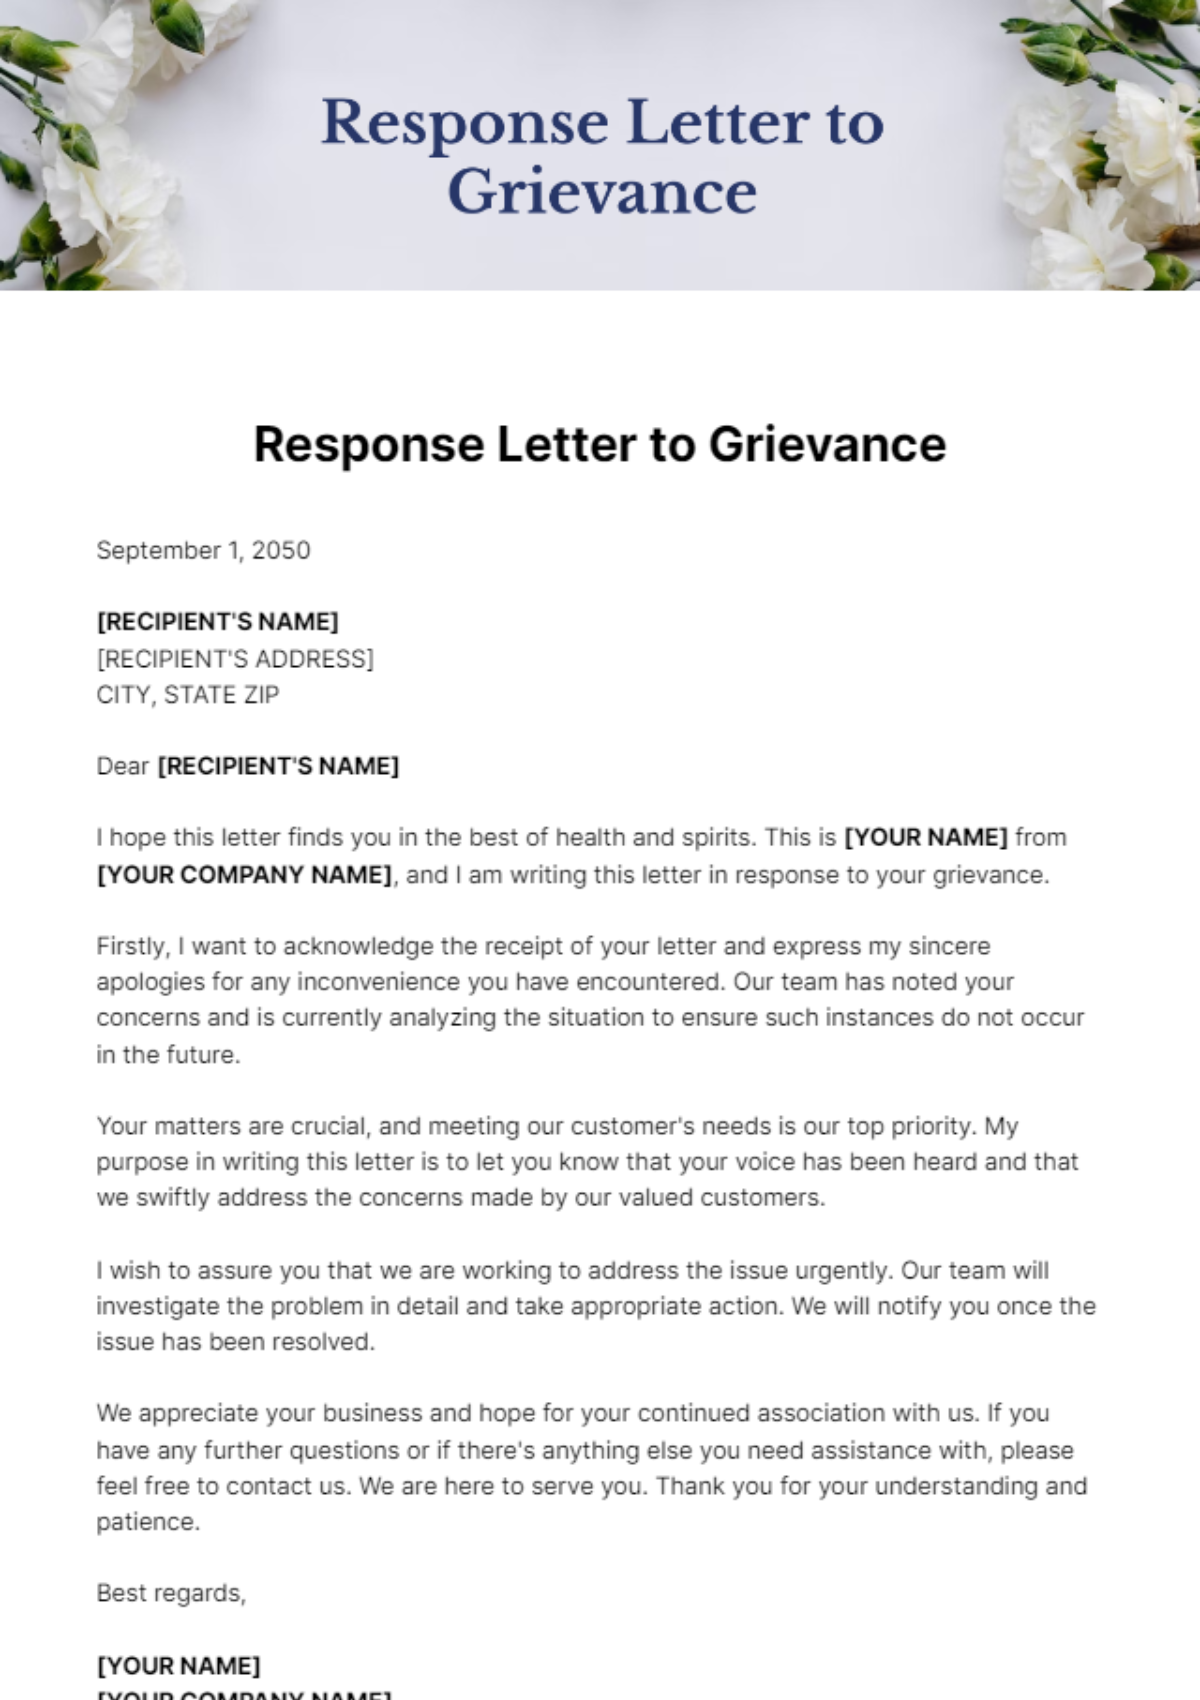 Response Letter to Grievance Template